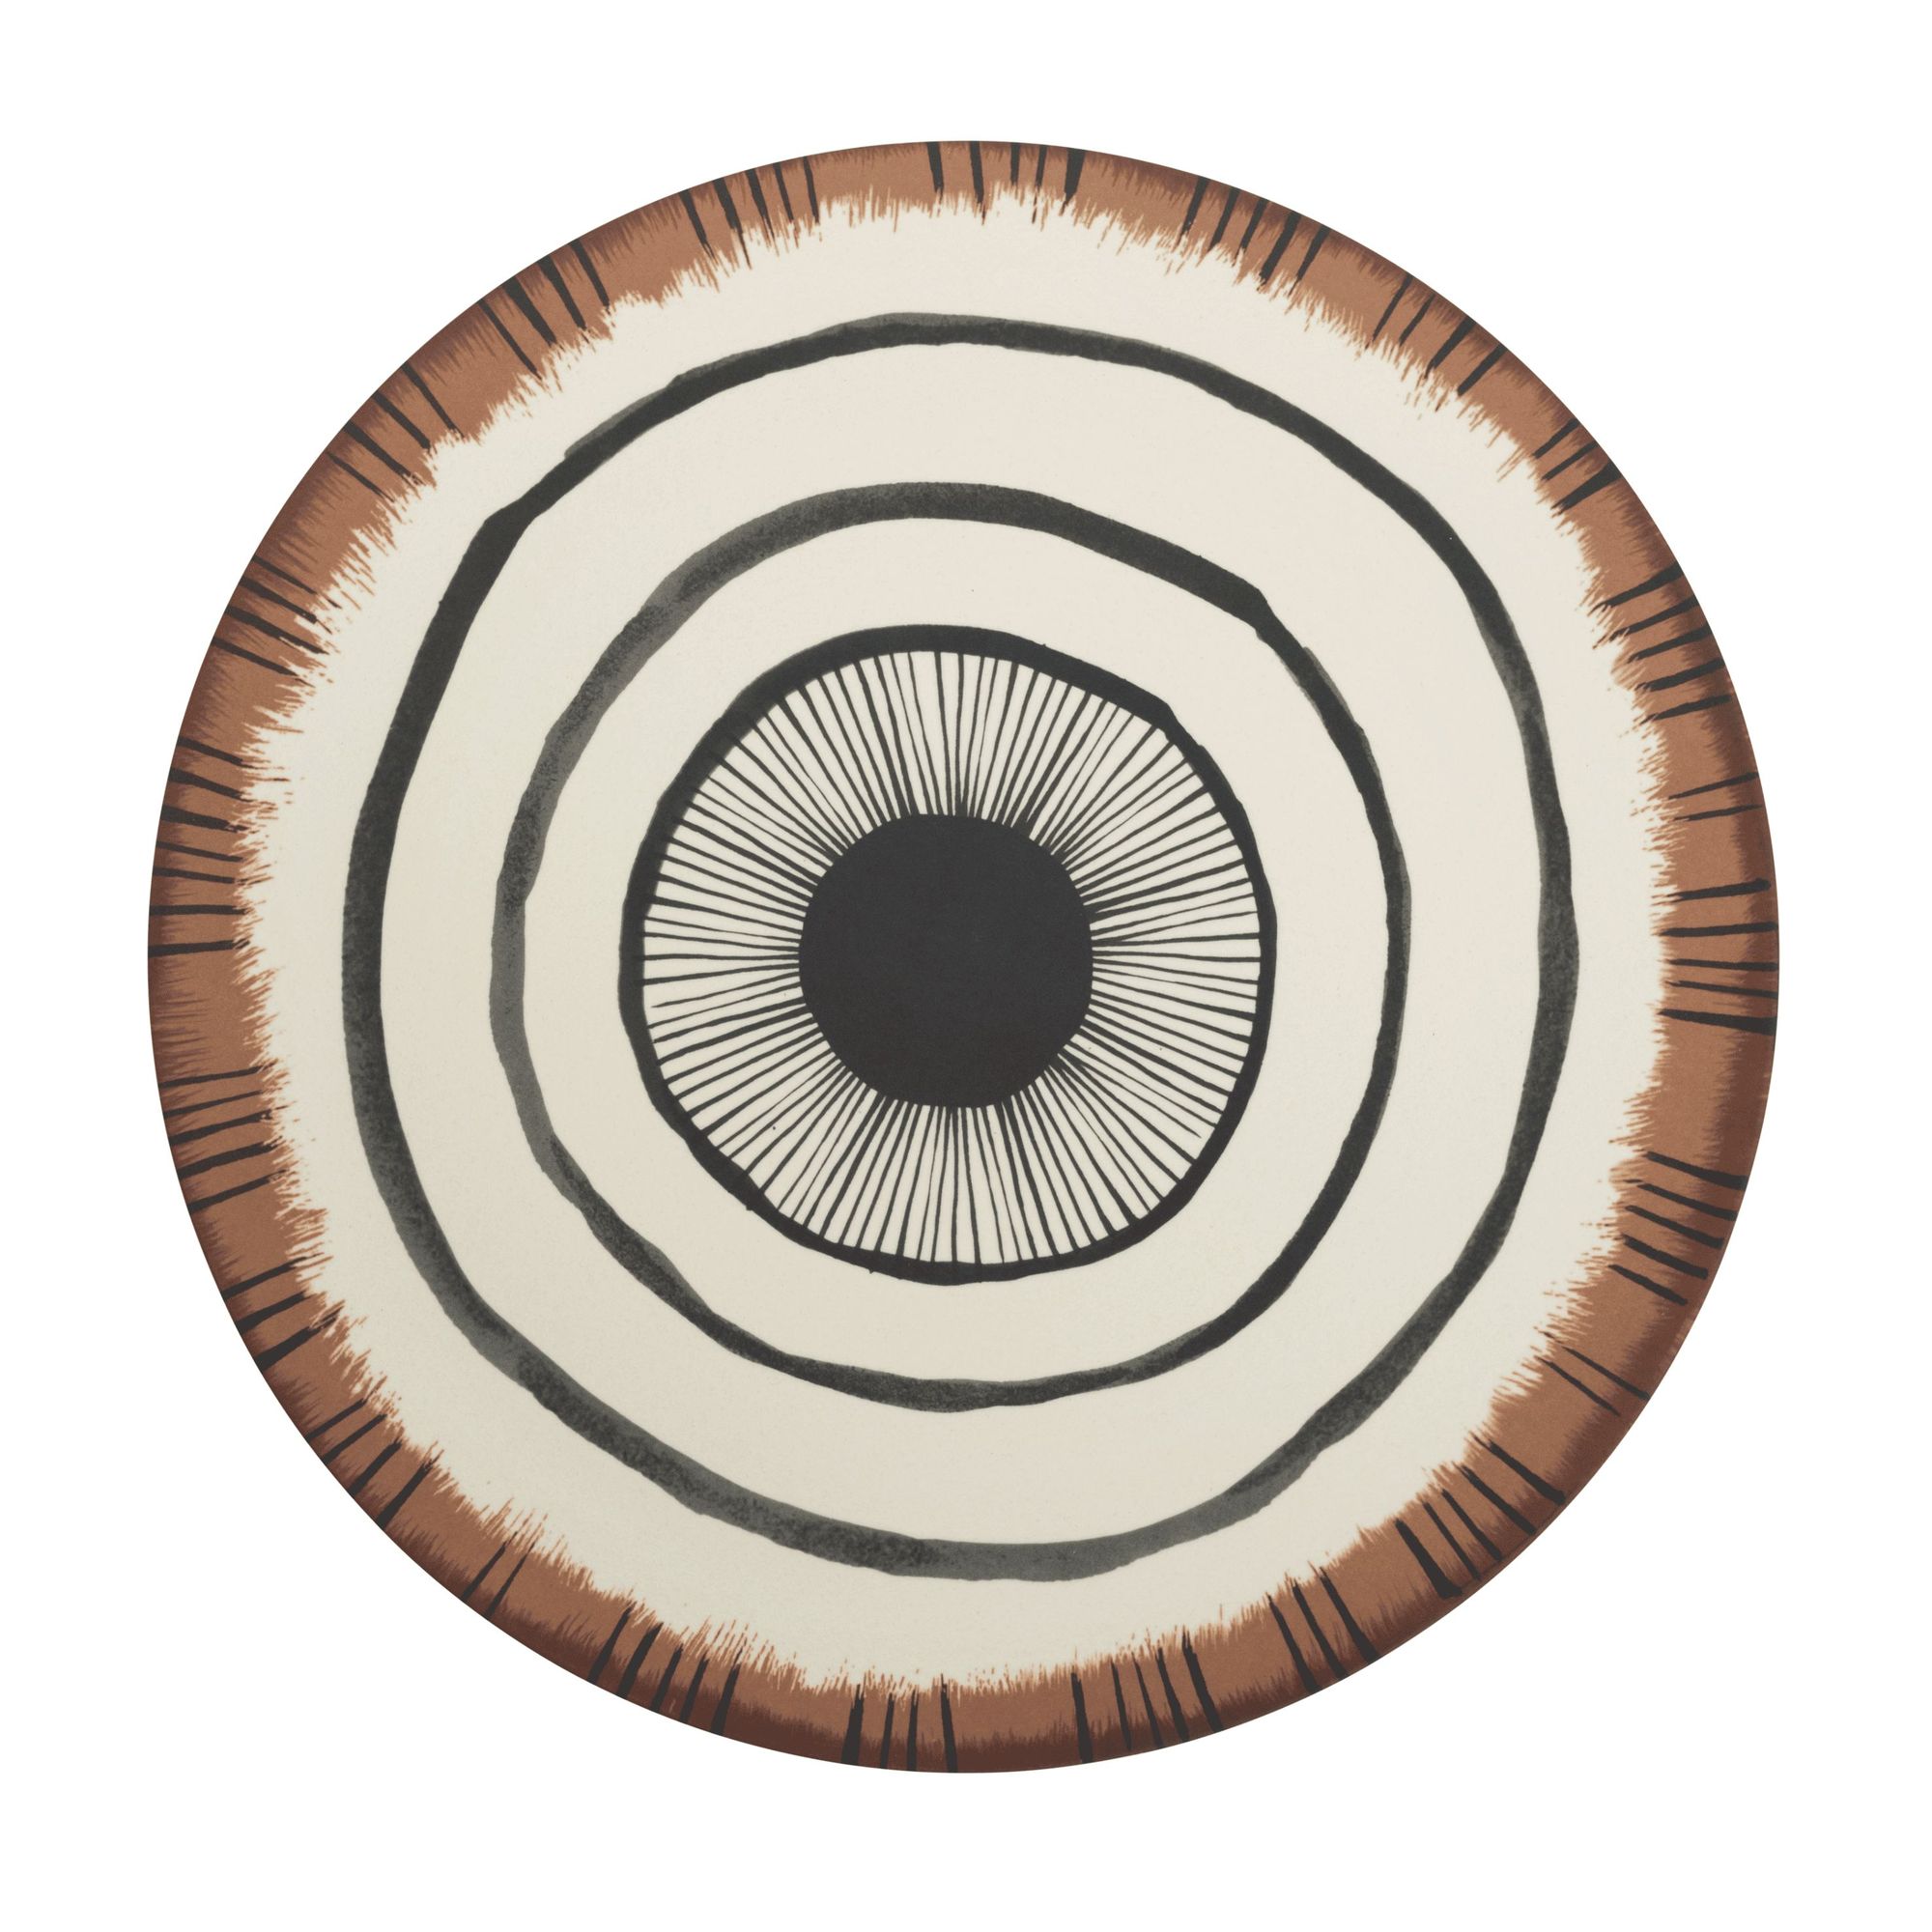 Unc Serving Plate Bamboo 34 Cm Vibration A Gift